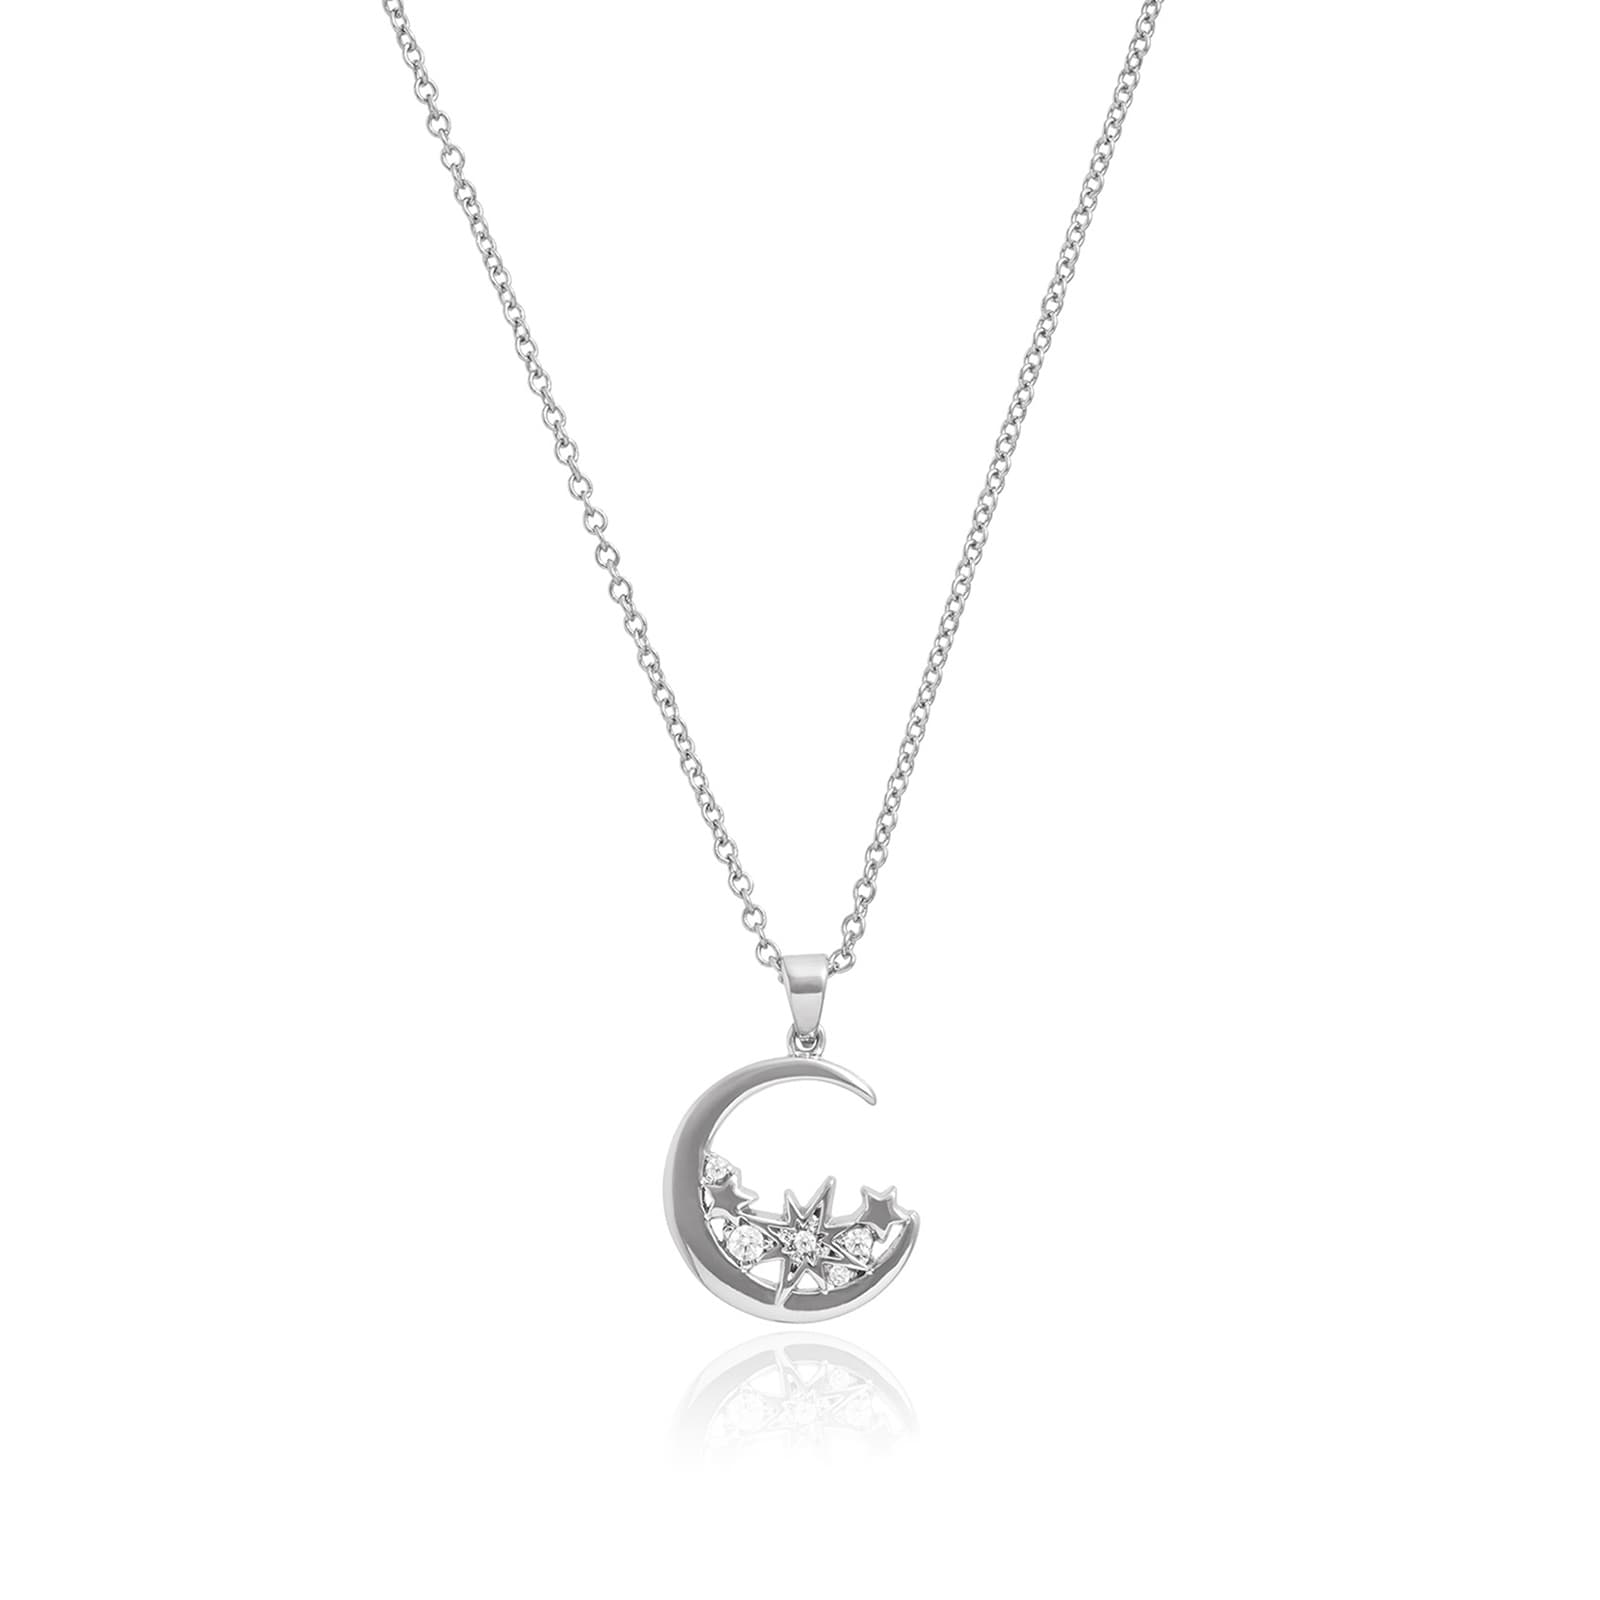 Sterling Silver Celestial Silver Moon Necklace